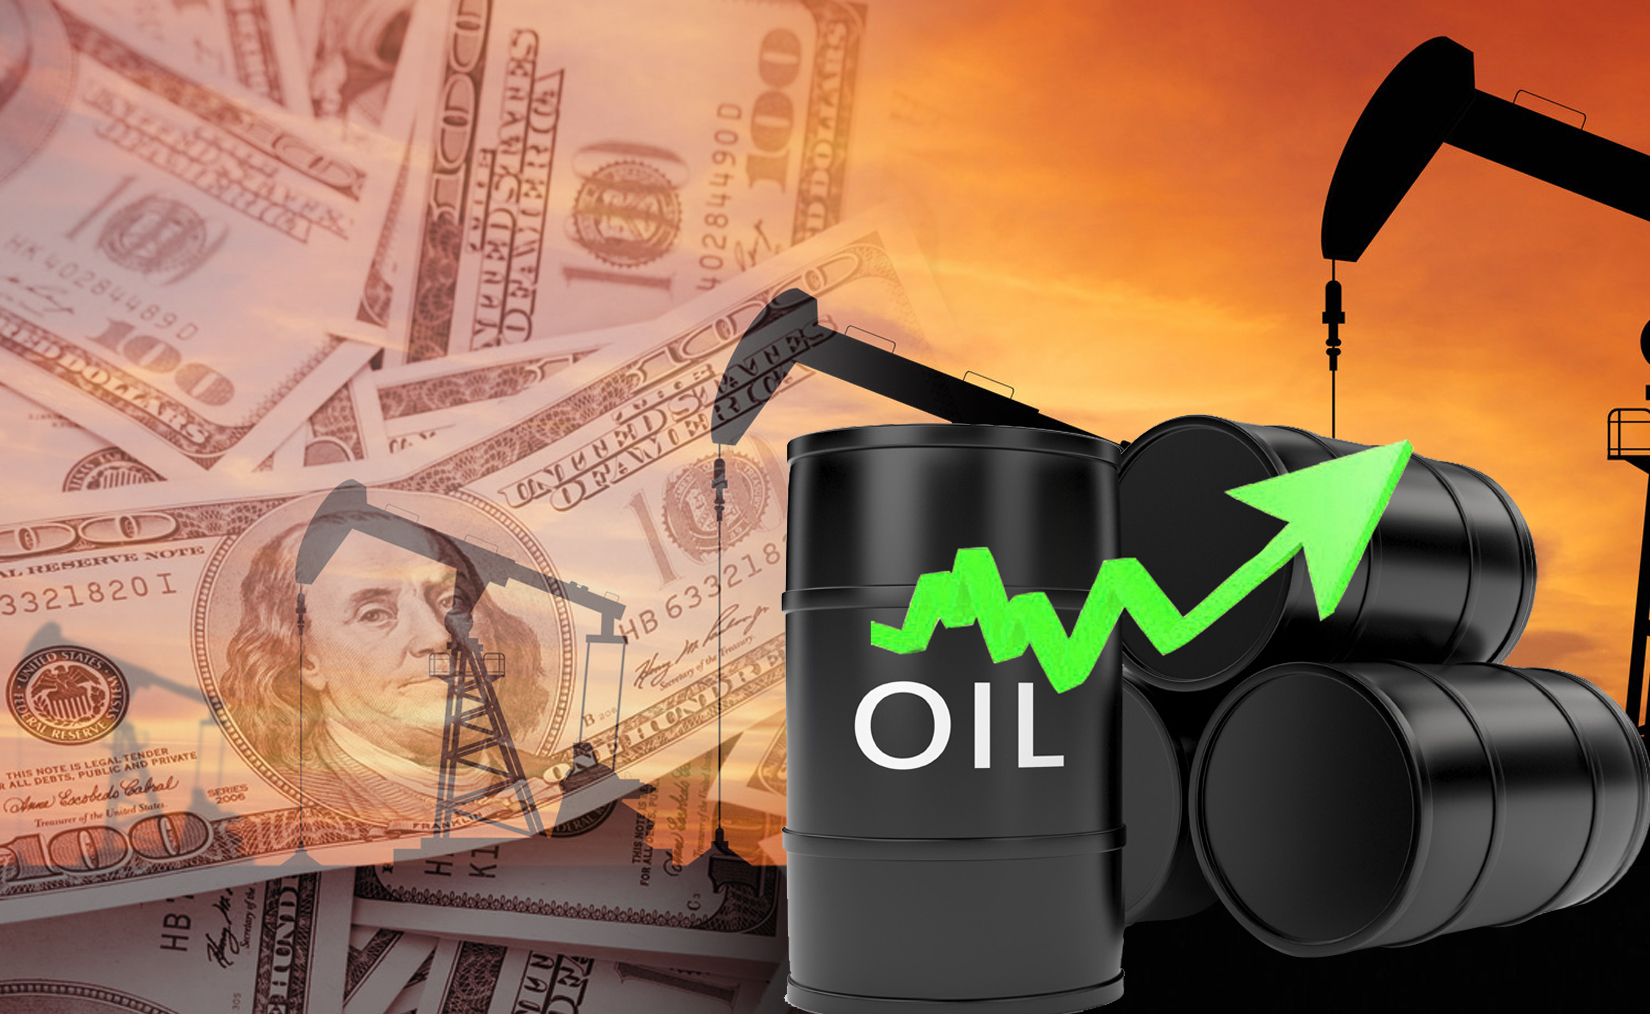 Kuwait oil price up 68 cents to USD 17.36 pb                                                                                                                                                                                                              